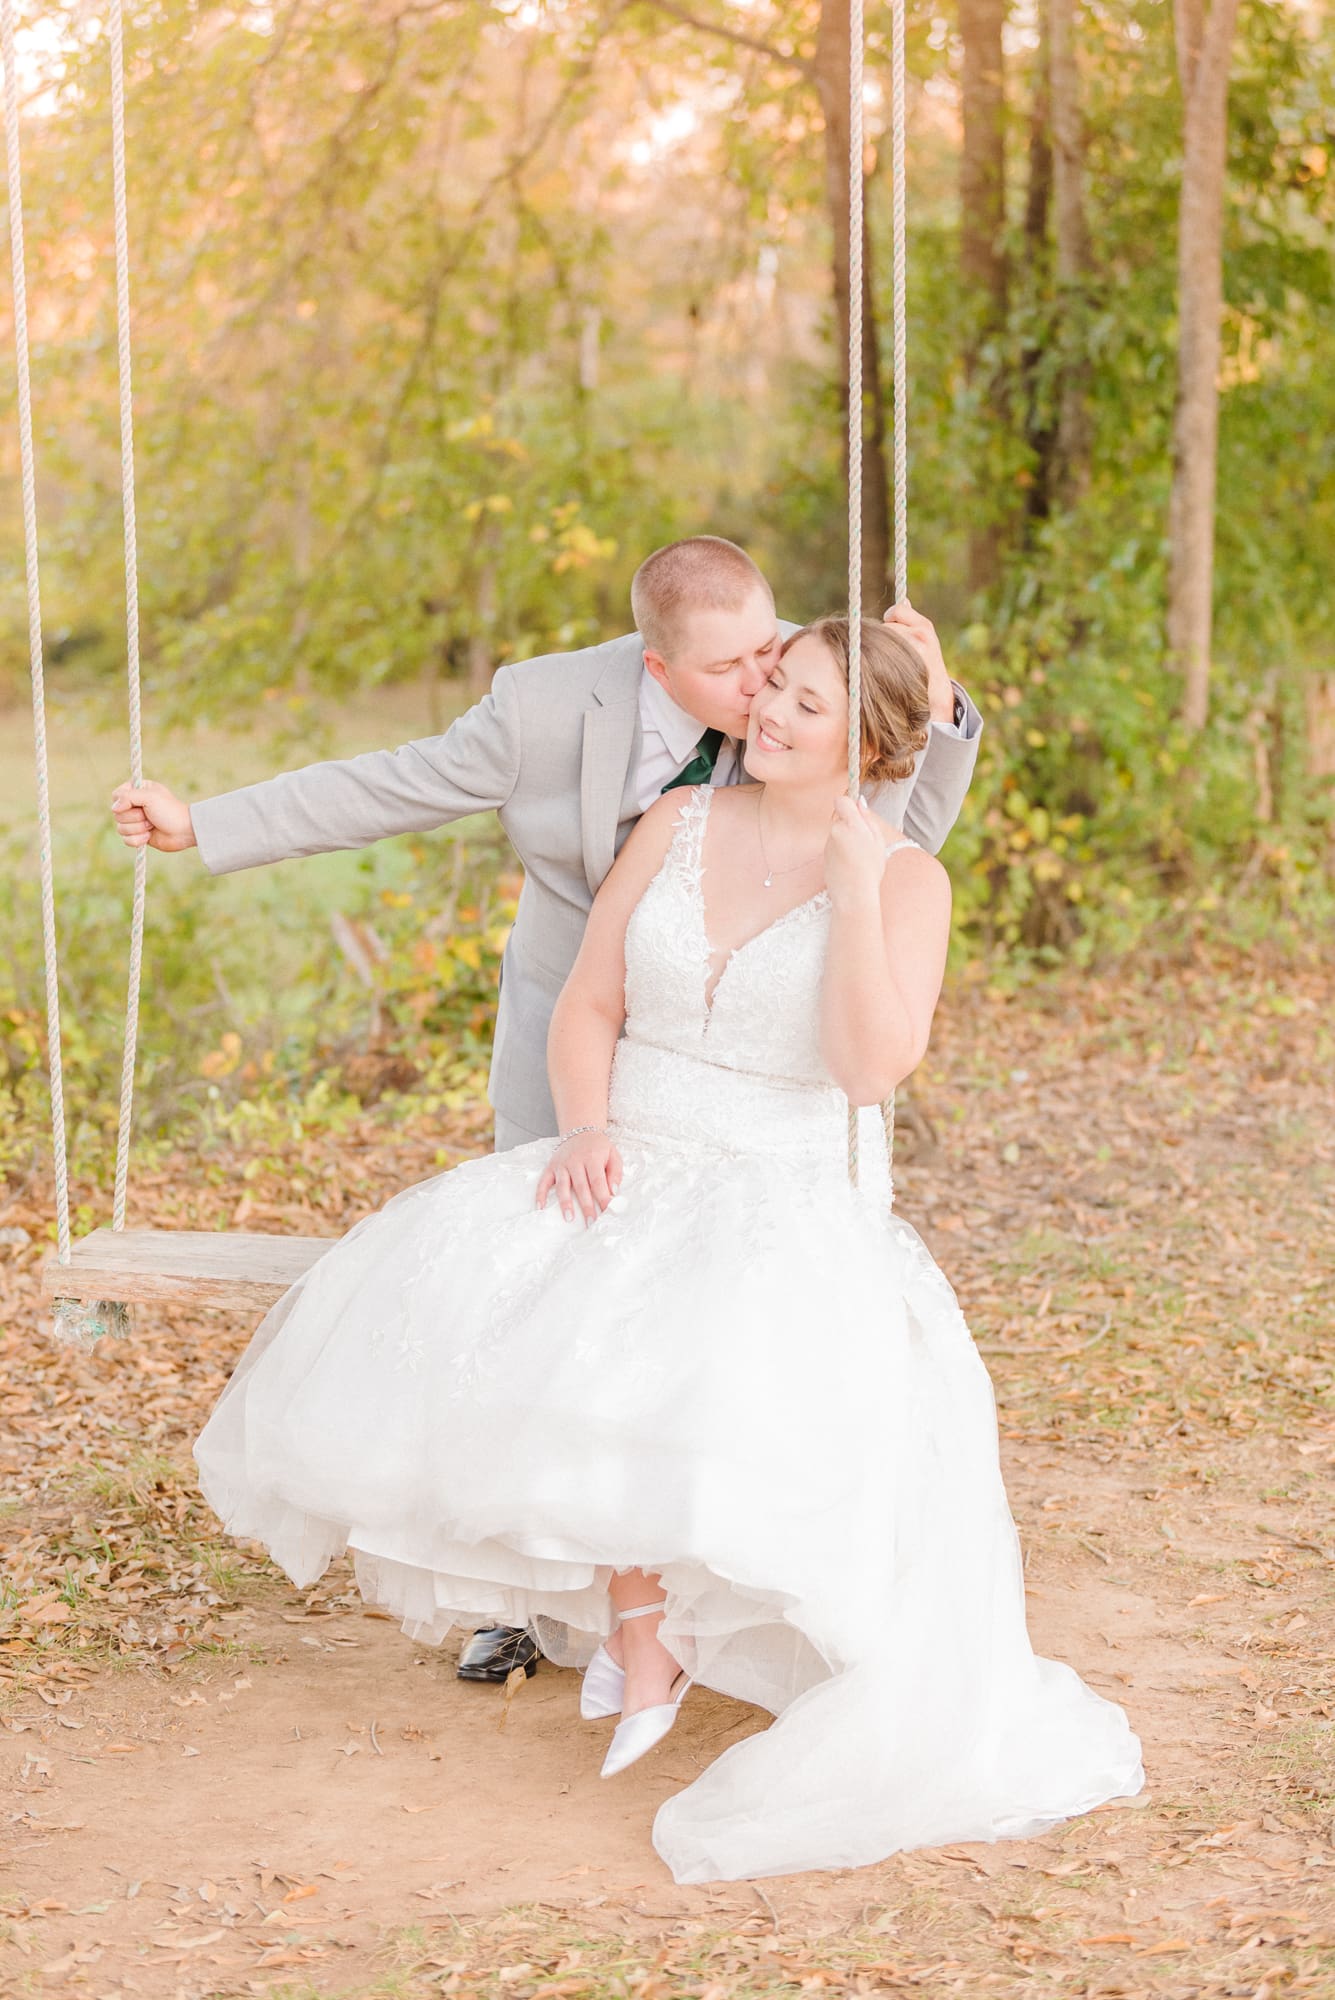 The groom kisses the bride's cheek as they swing on the swinging bench at Low Meadows Estate.